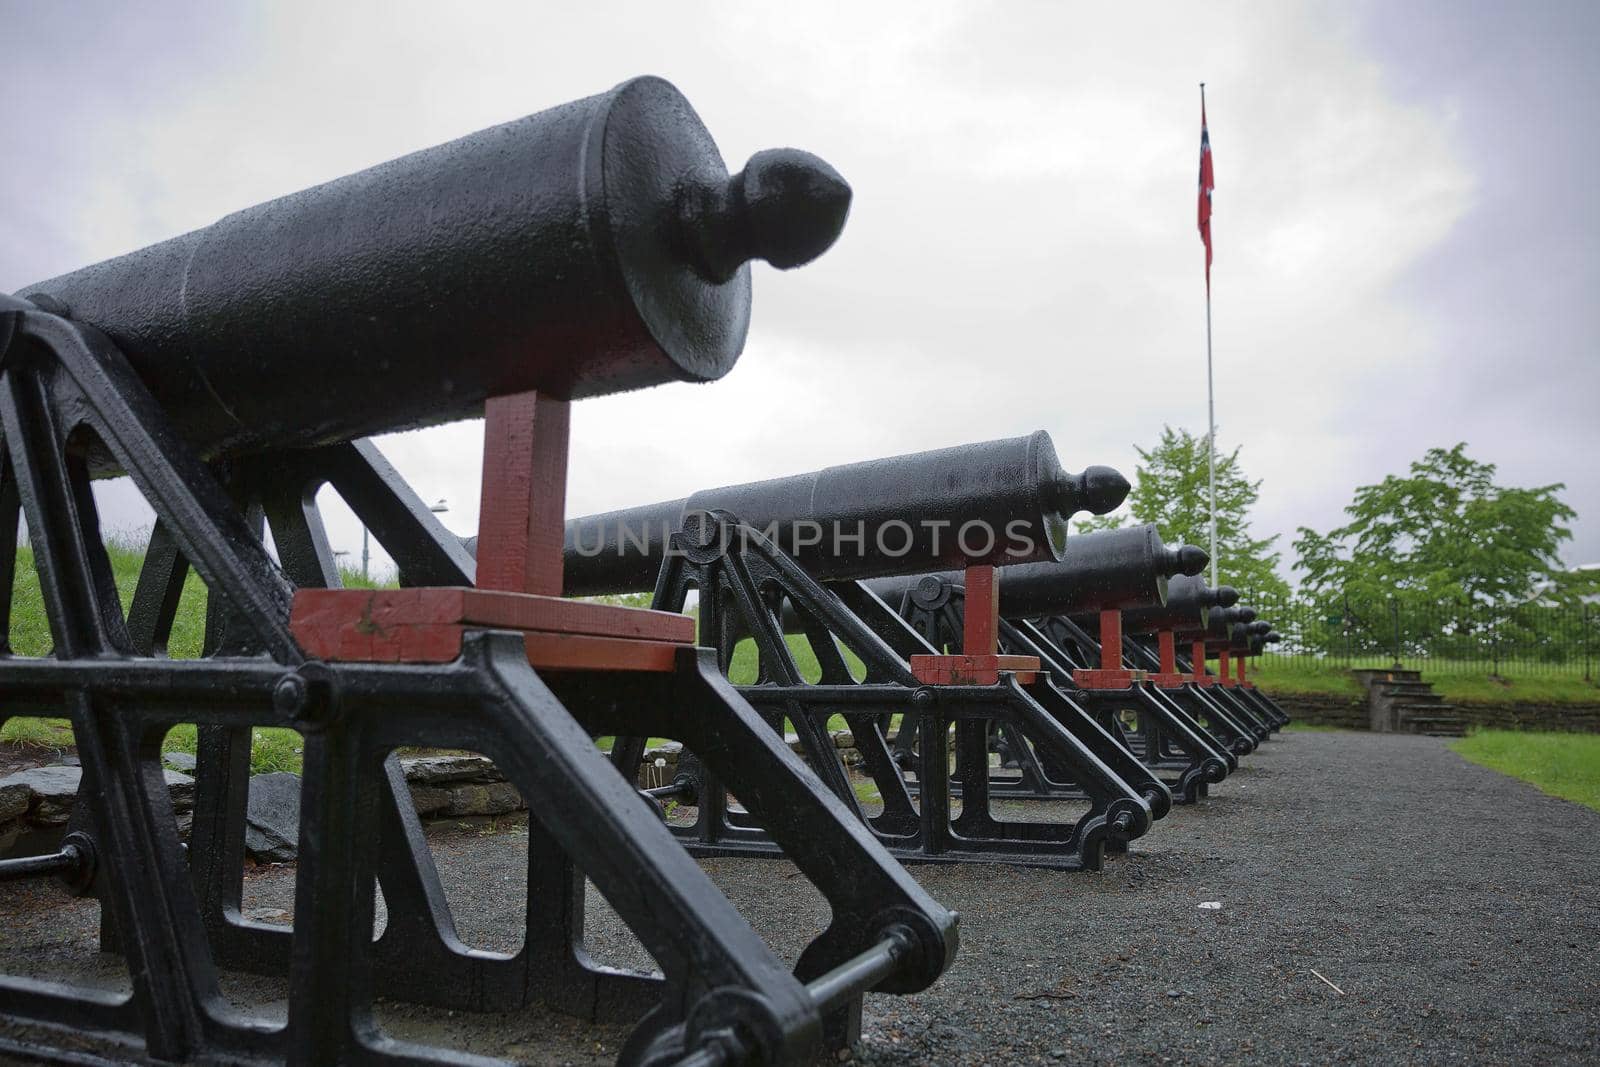 City defense canons placed at the castle in Bergen, Norway.